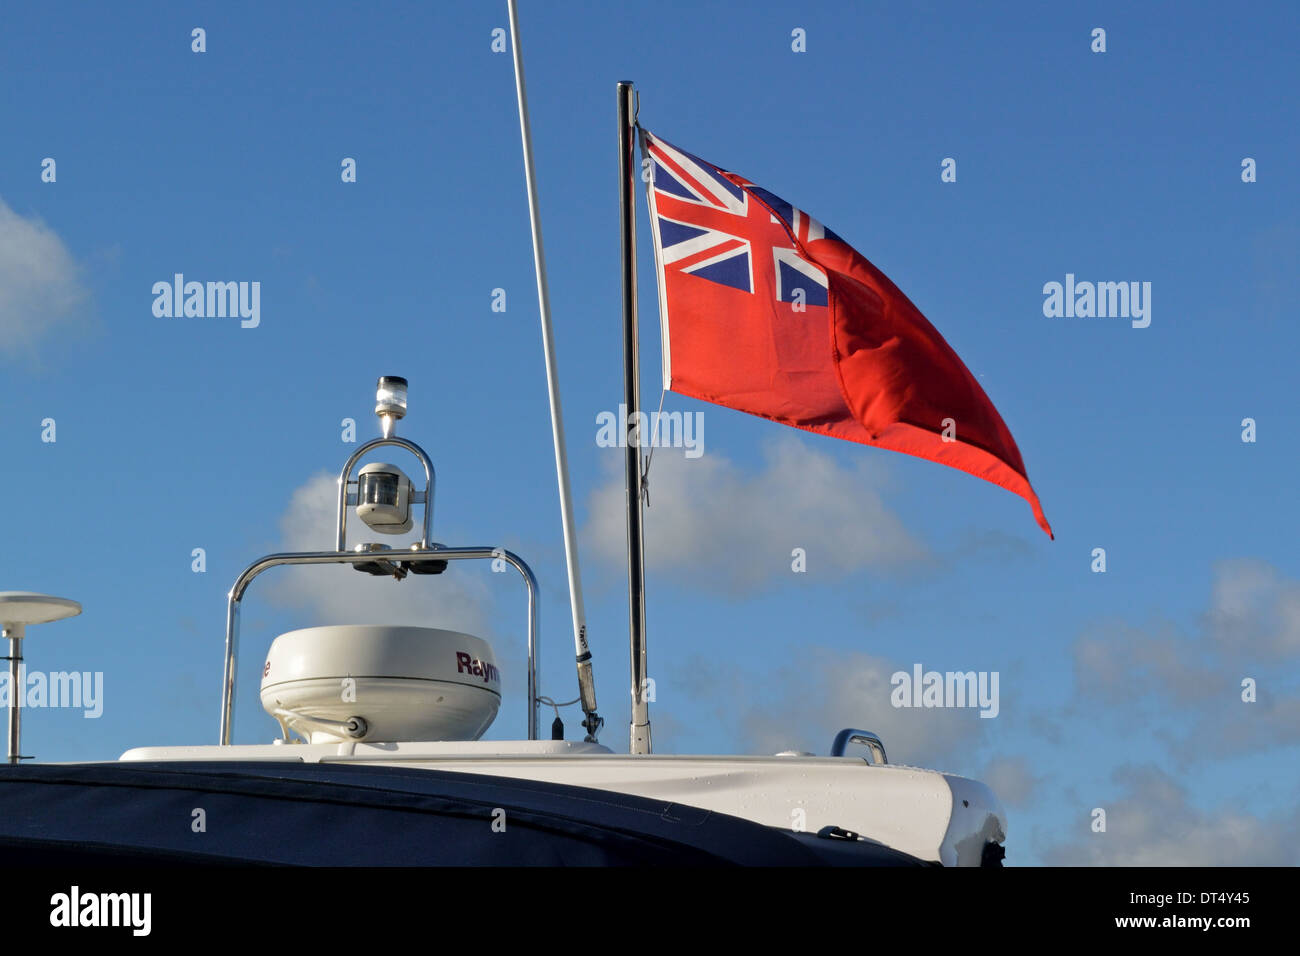 Red ensign flying from the roof of a motor boat, Oulton Broad, Suffolk, UK Stock Photo